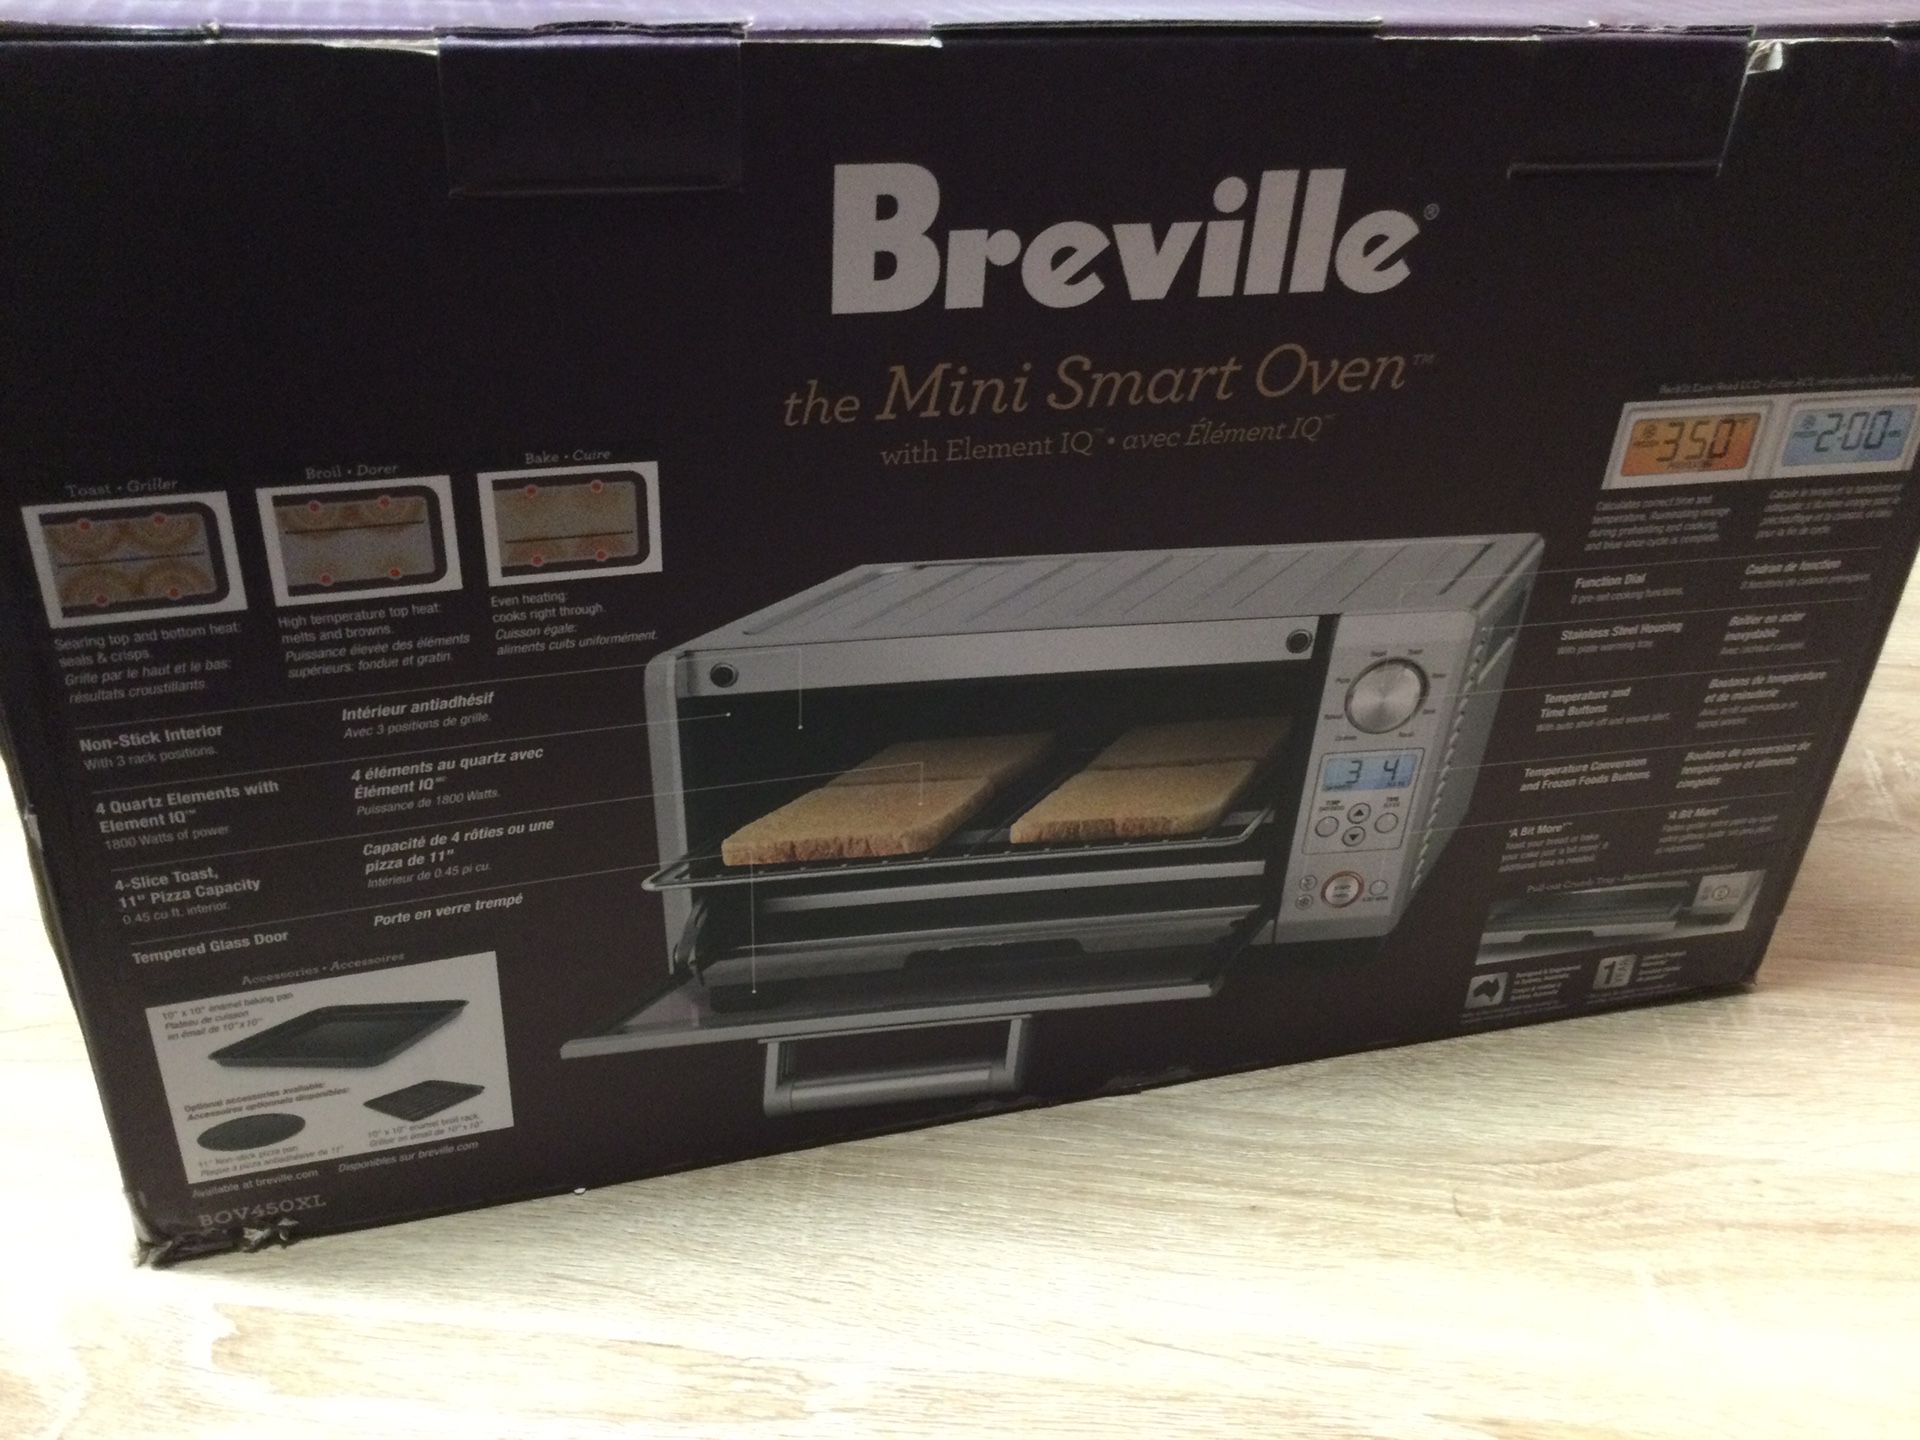 BREVILLE MINI SMART TOASTER OVEN, BRUSHED STAINLESS STEEL BOV450XL. OPEN BOX NEVER USED